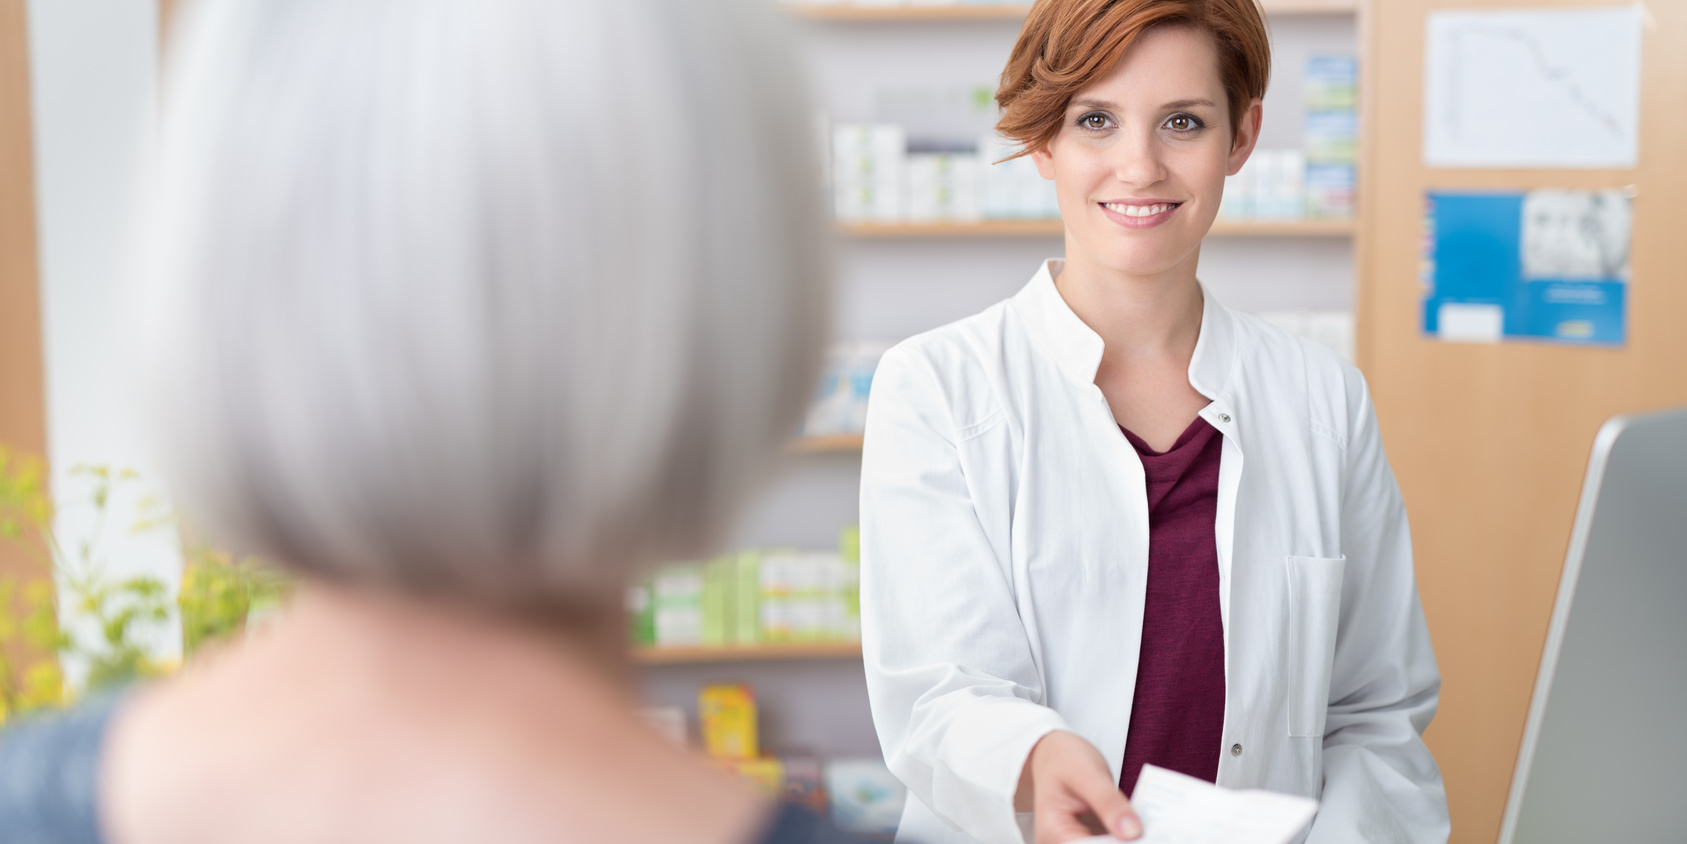 A grey haired lady gives a prescription to a young pharmacist.